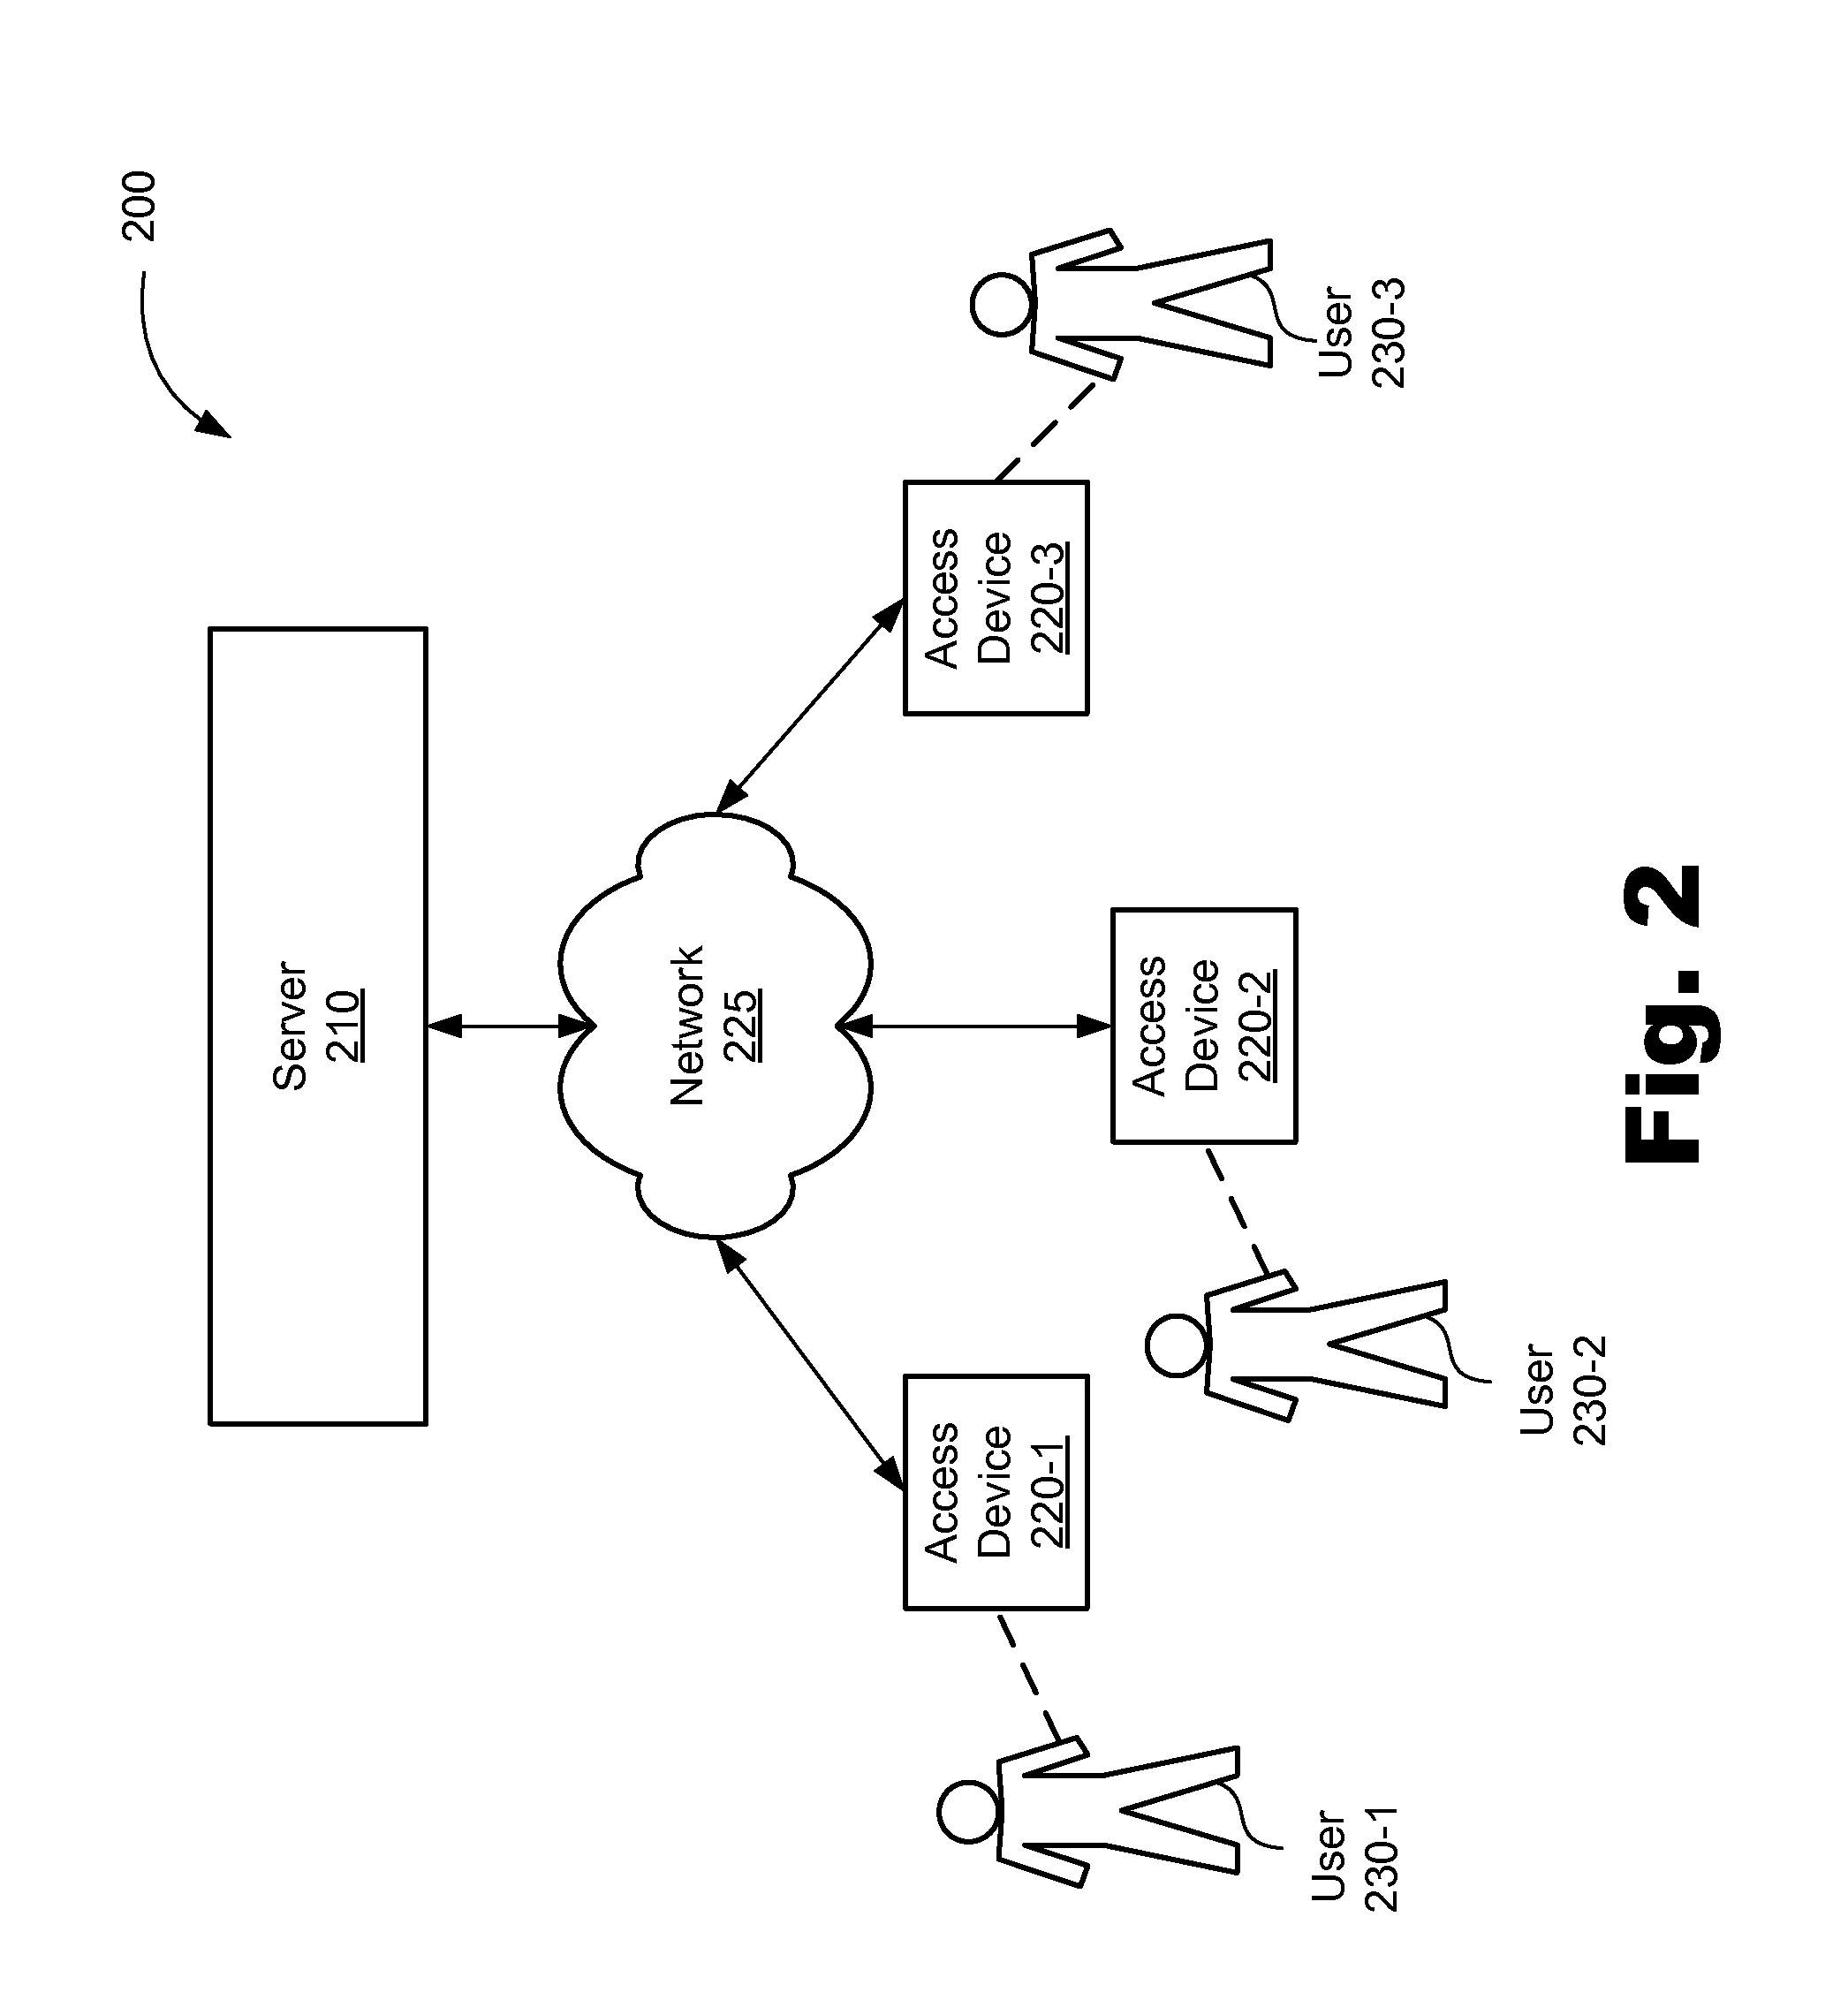 Environmental factor based virtual communication systems and methods